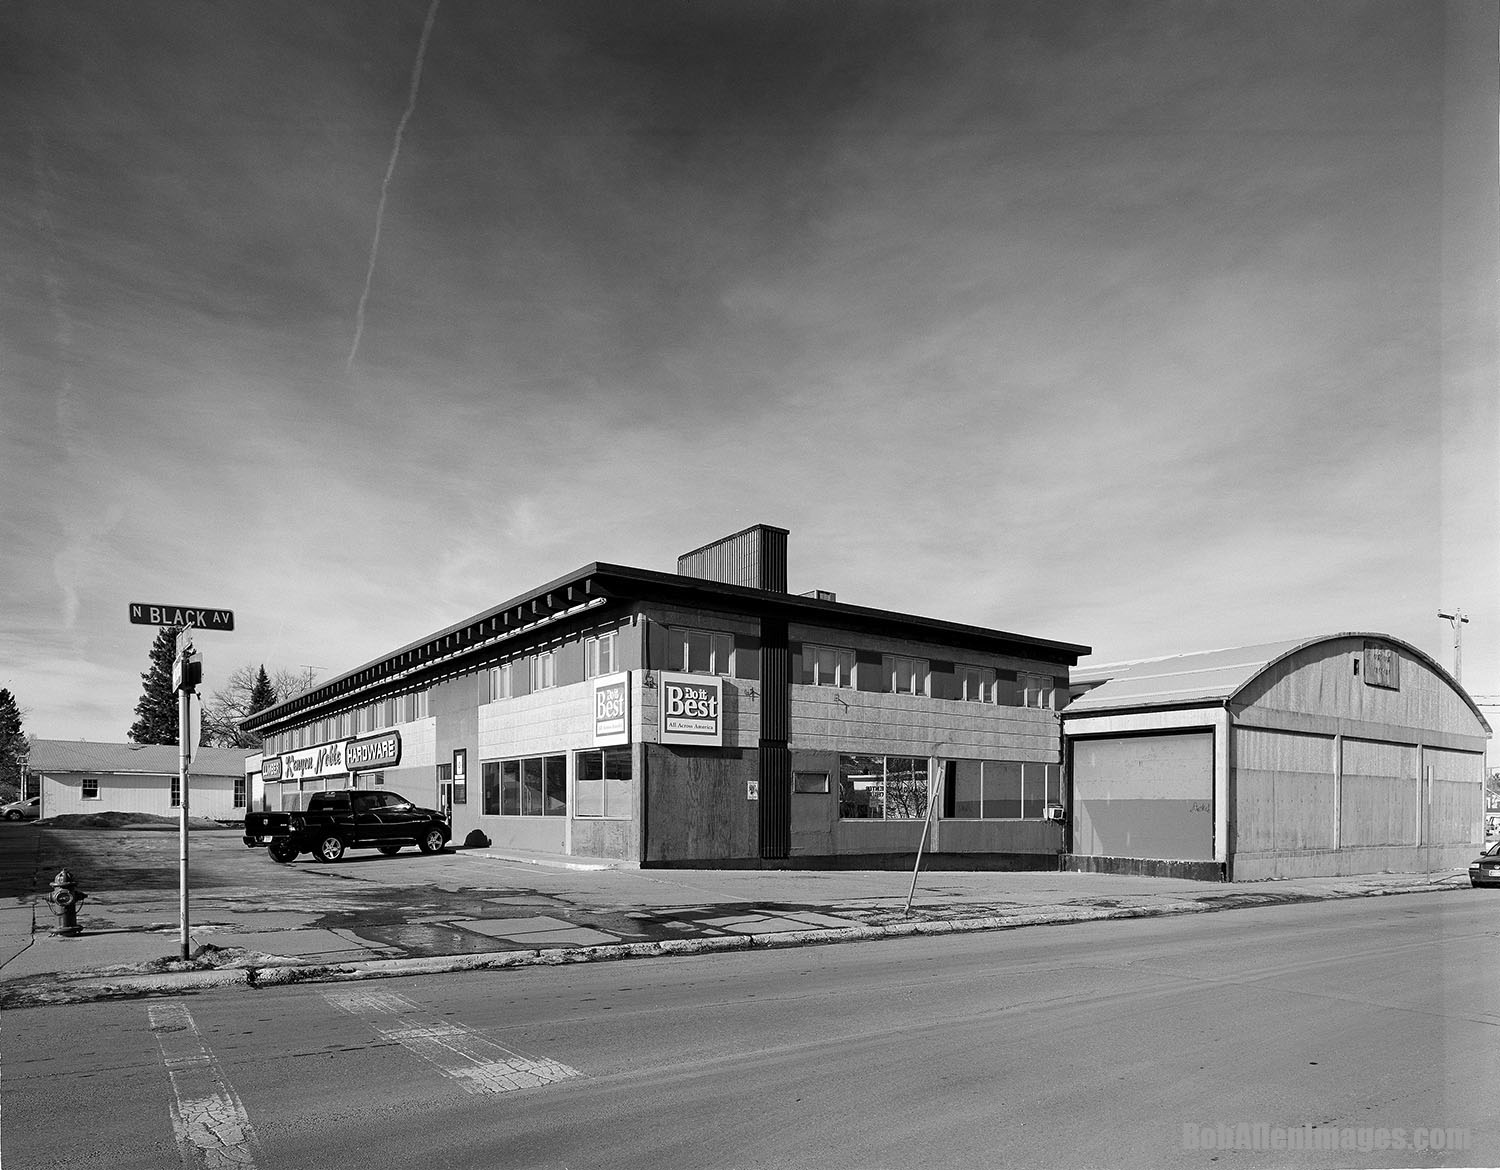  Prior to the demo permit being issued by the city of Bozeman, the Kenyon Noble Lumber building was photographed in accordance with the Historic American Buildings Survey requirements to use a 4"x5" view camera with film. &nbsp;How old school...?    